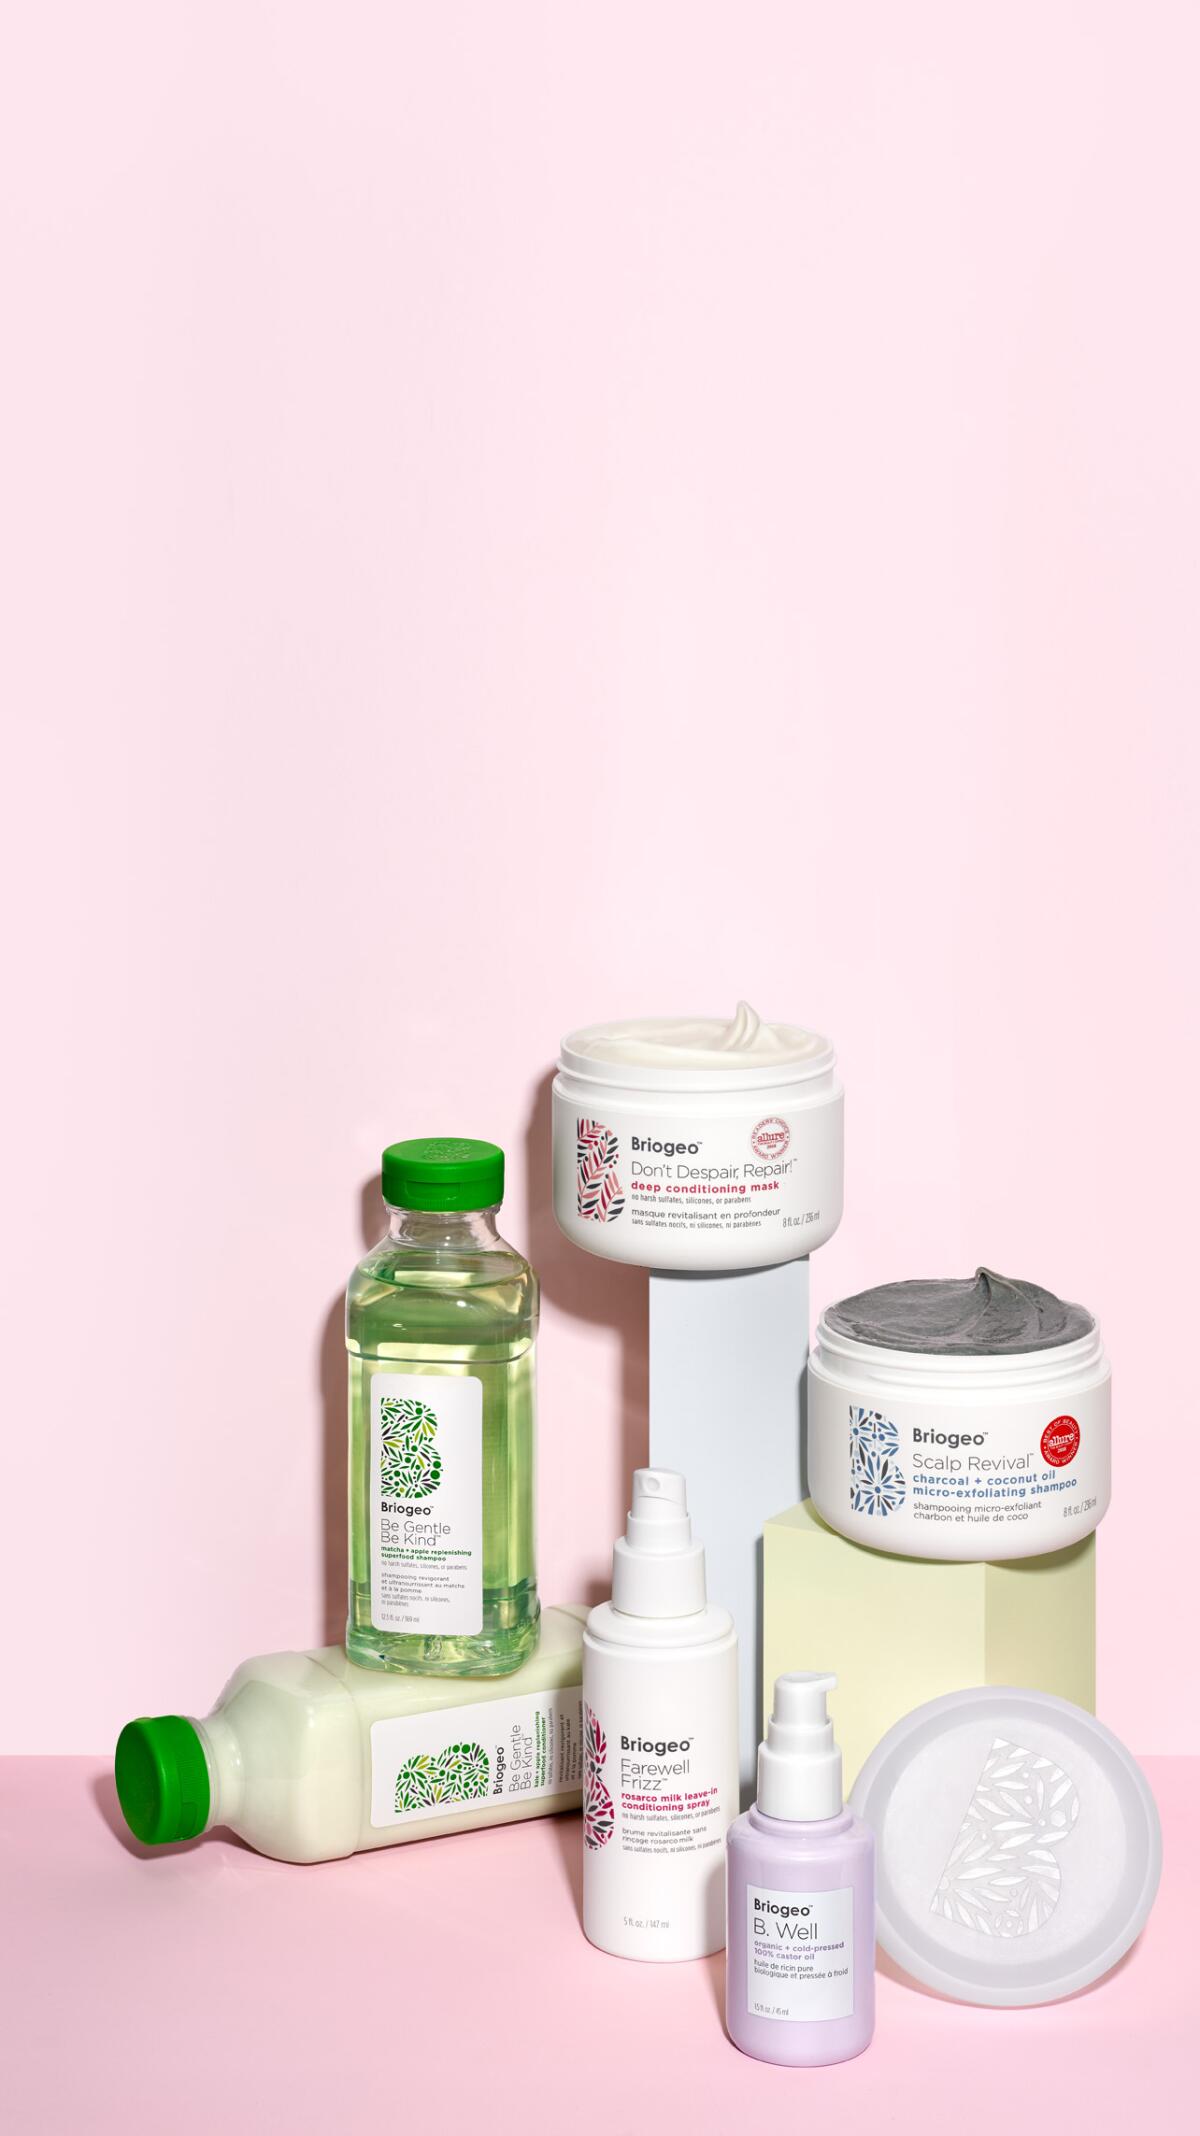 Bestselling products from clean haircare line Briogeo.